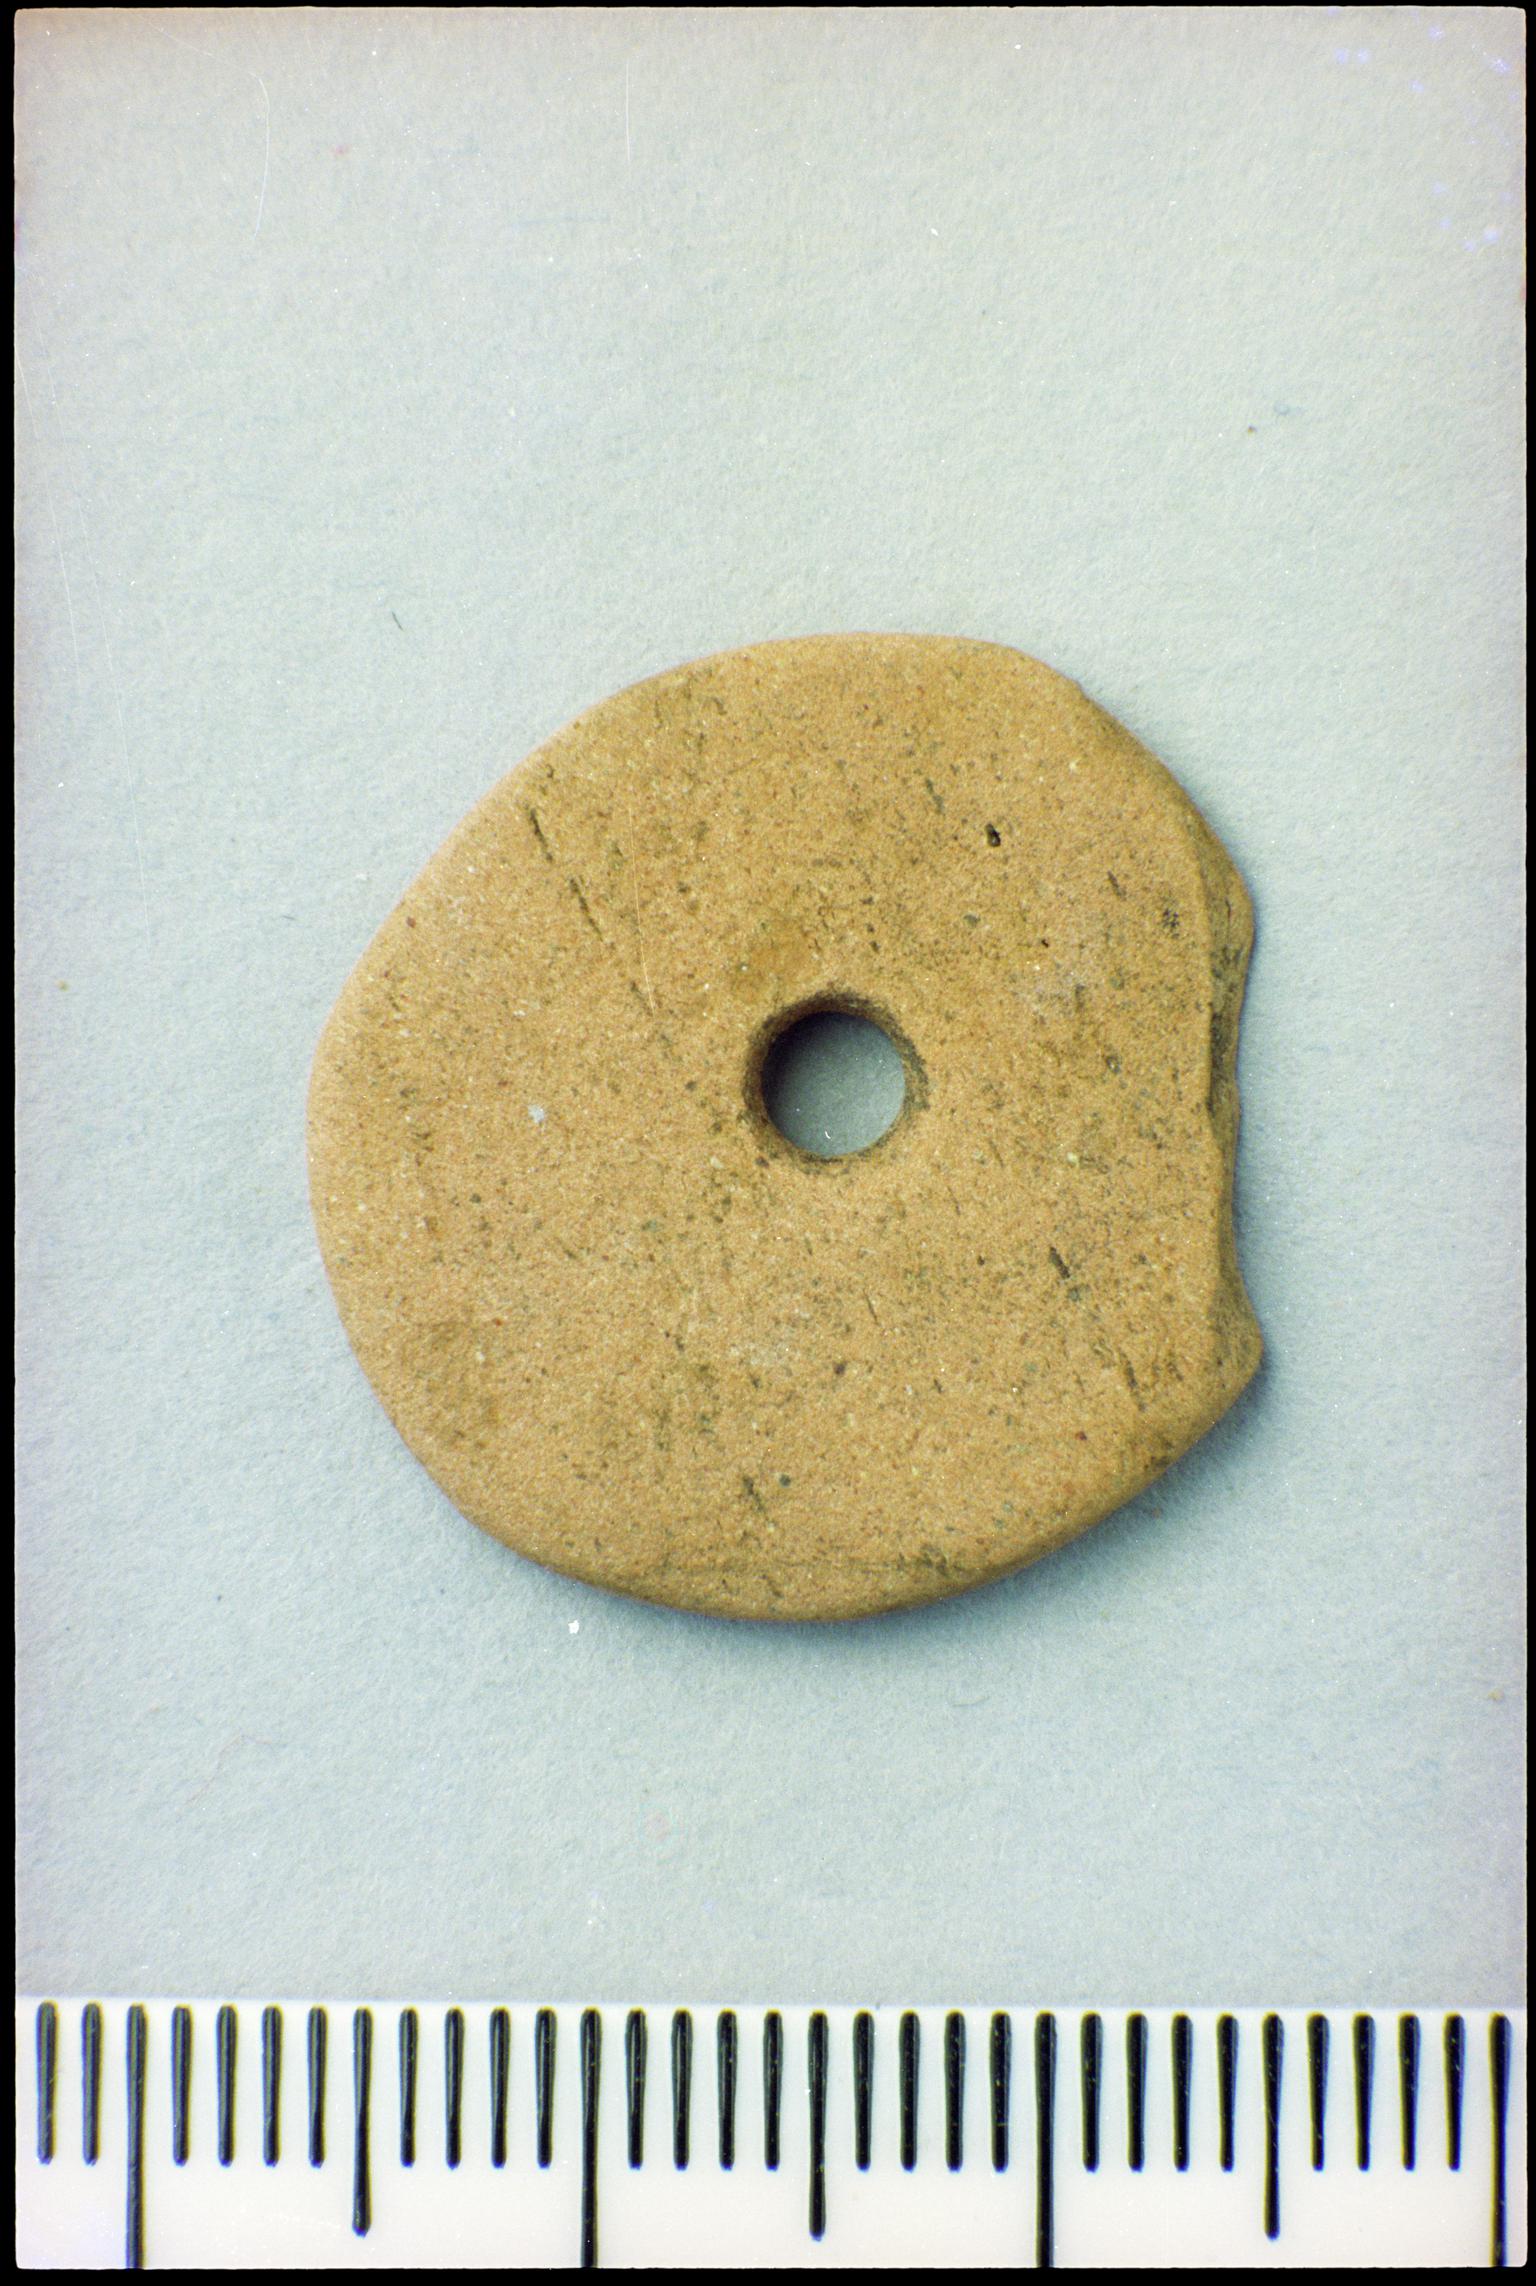 Roman pottery spindle whorl